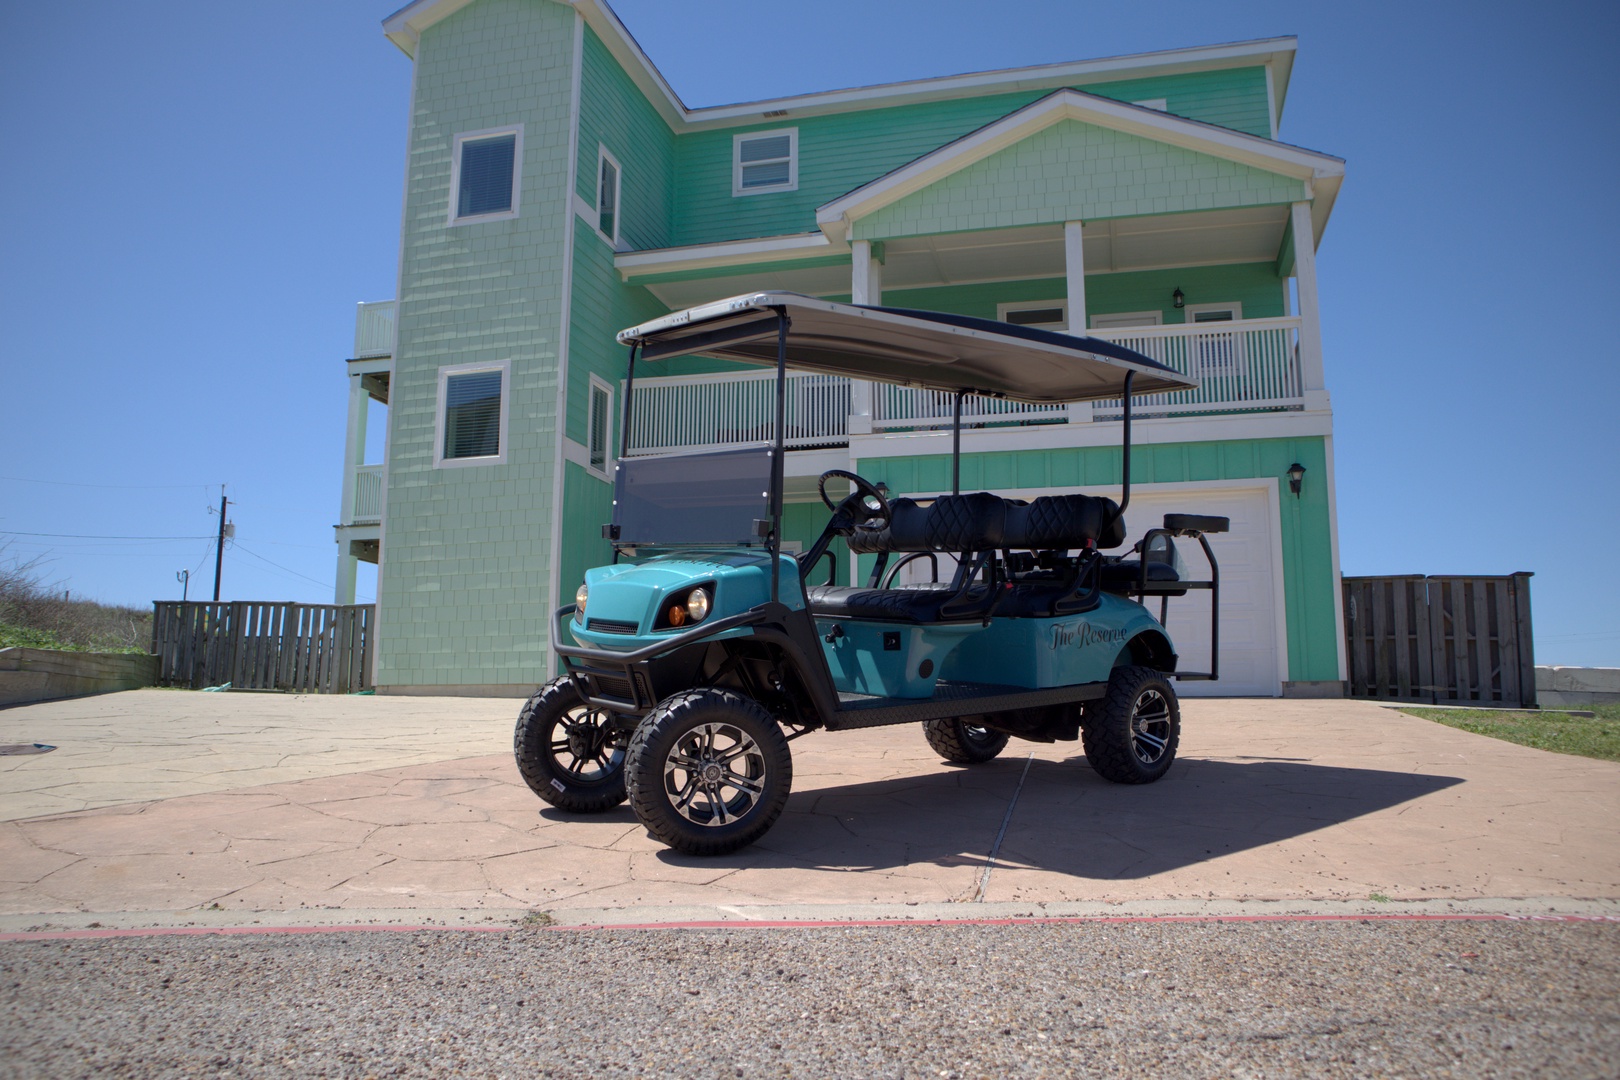 Brand new optional golf cart to add to your stay!